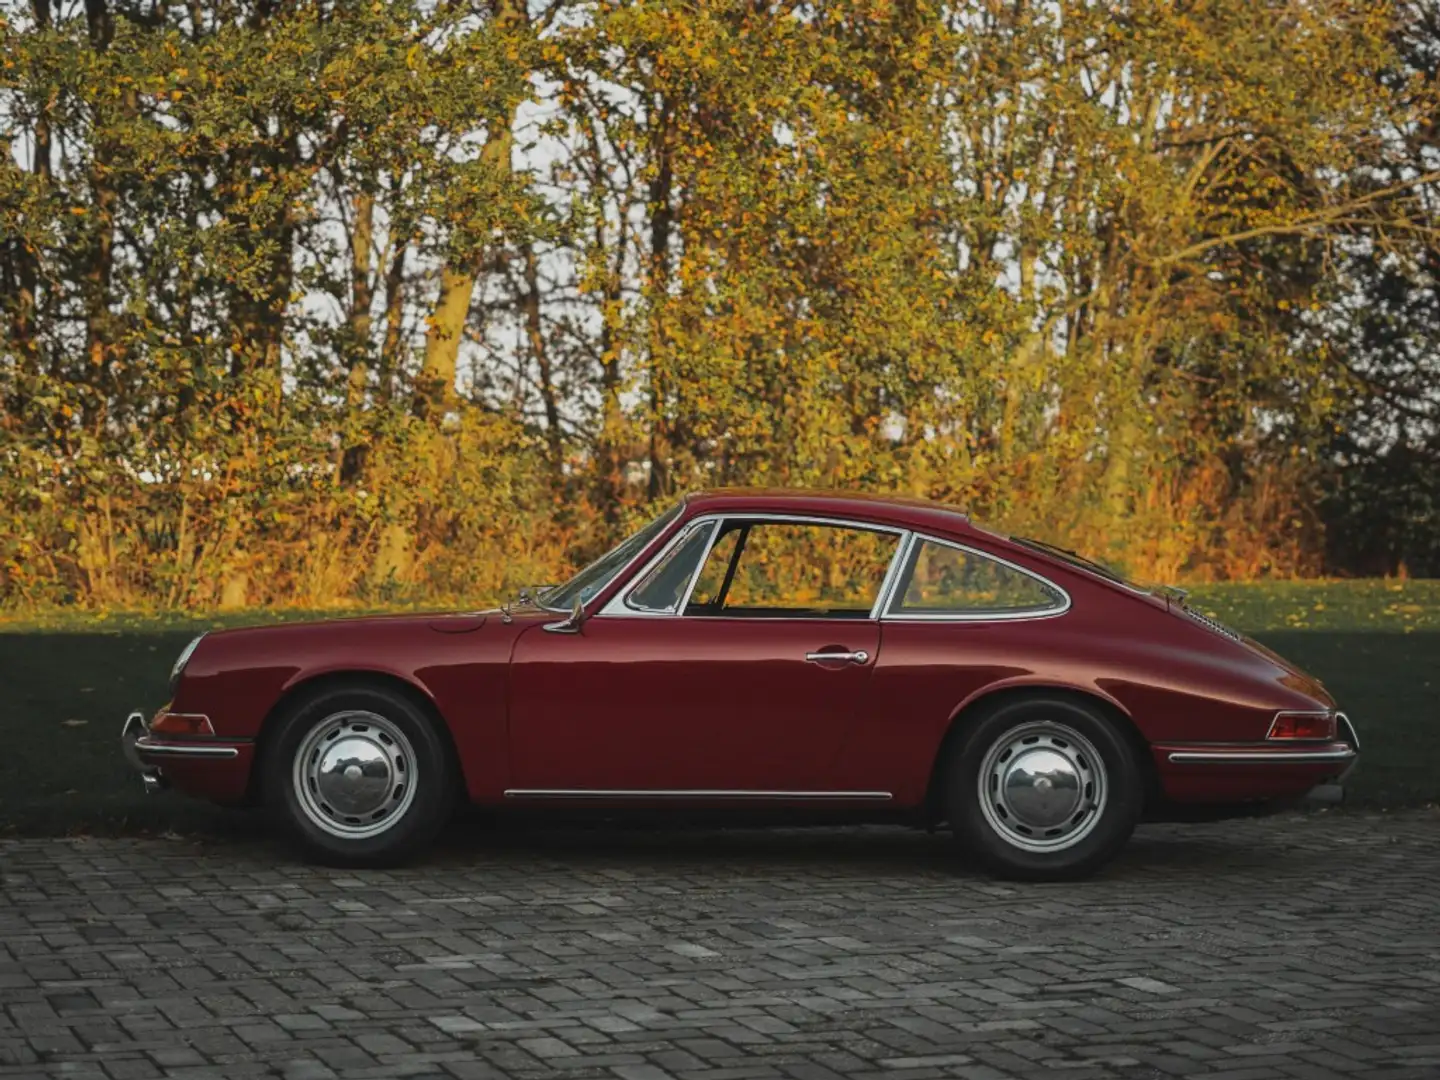 Porsche 911 1965 911 Coupe Matching numbers early chassis numb Červená - 2